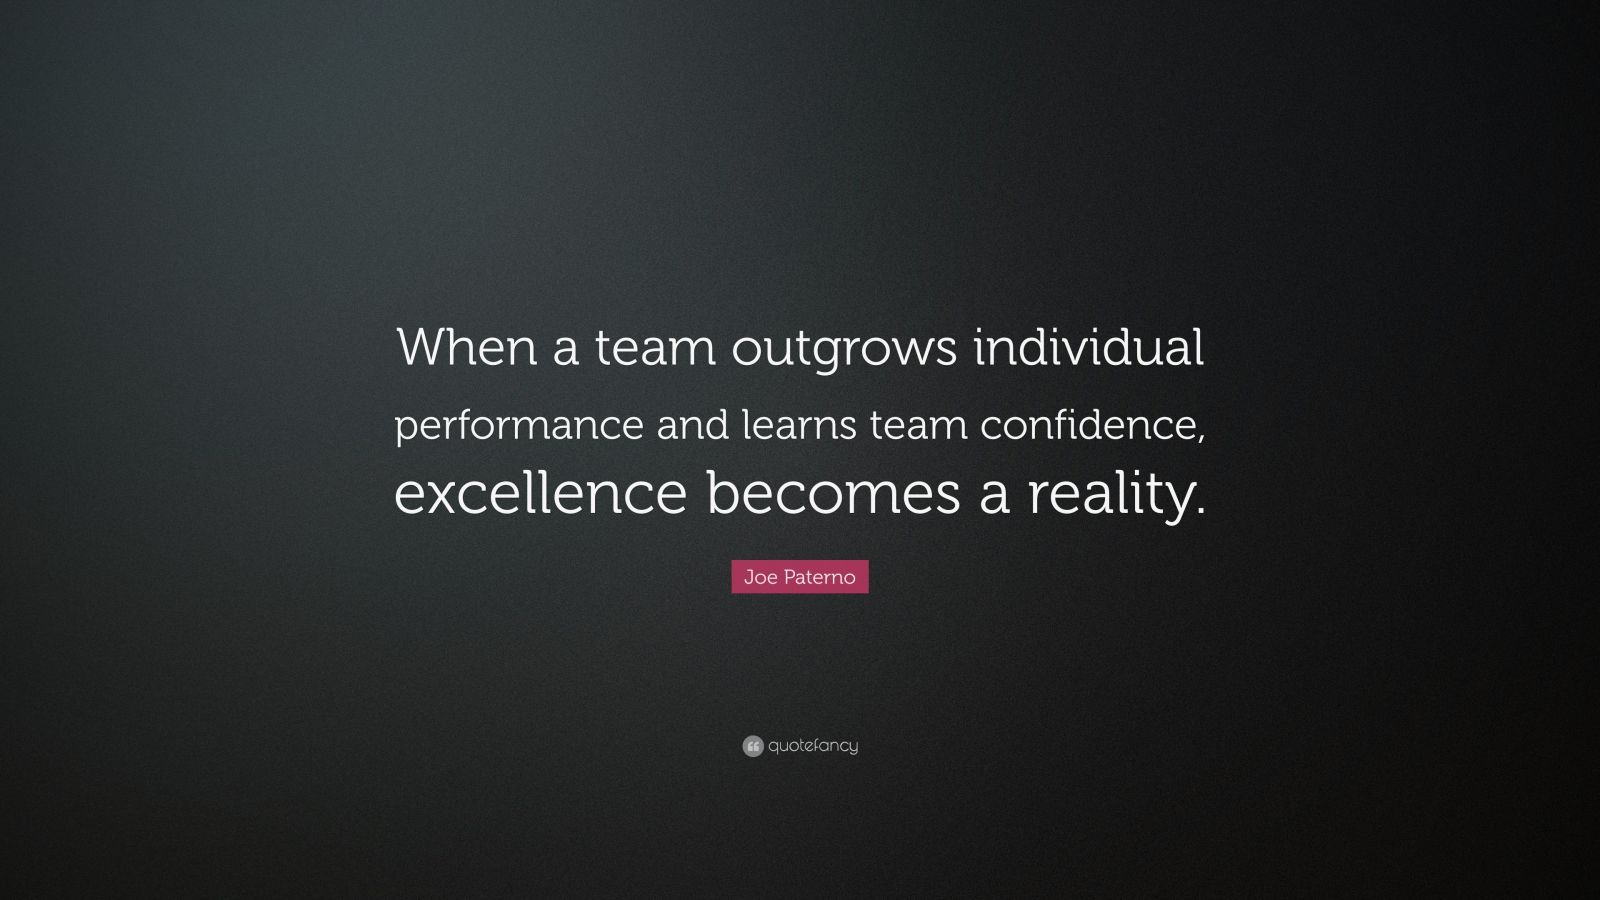 Joe Paterno Quote: “When a team outgrows individual performance and ...